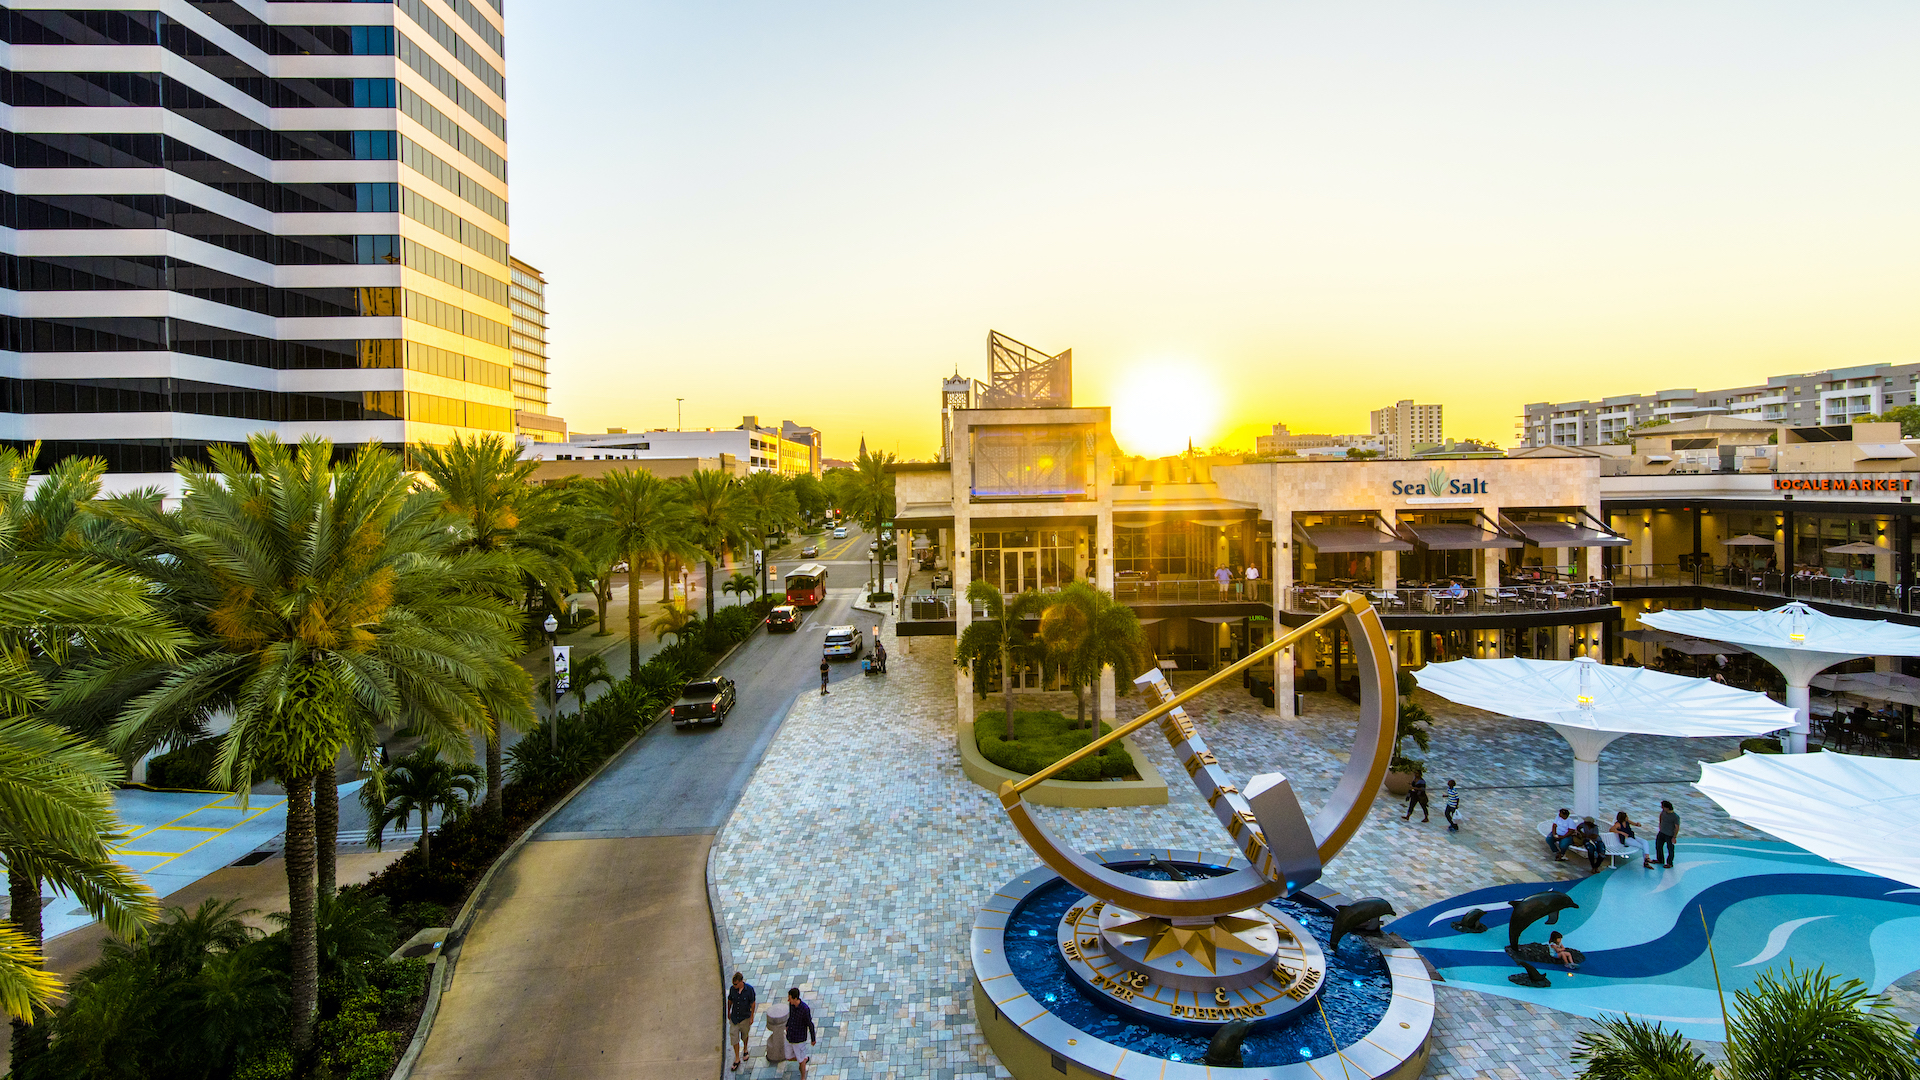 Photo of a sunrise over a shopping plaza with a giant sundial at the center